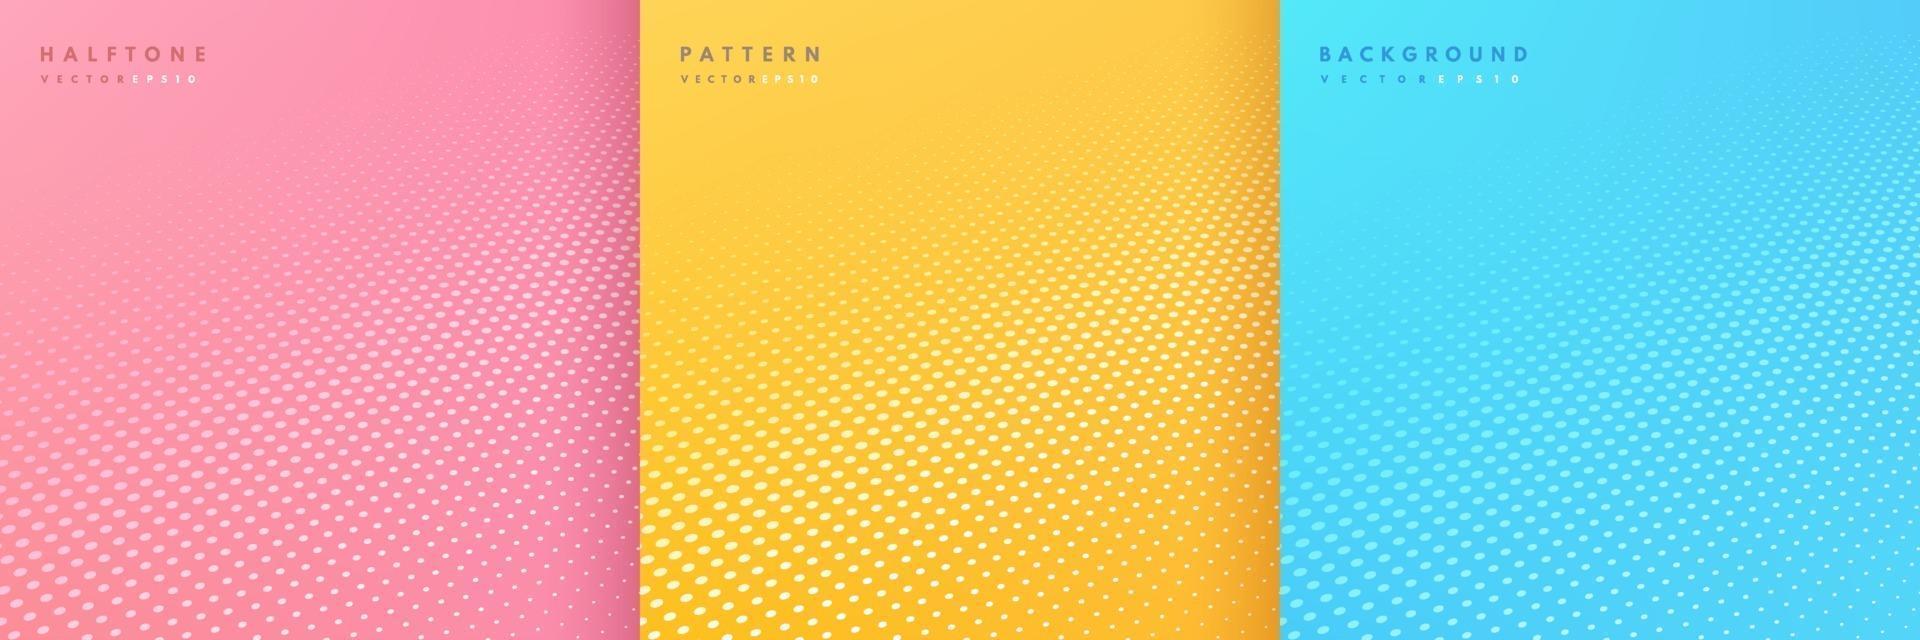 Set of pattern dots banner. Abstract pink, yellow and blue color halftone perspective background. Simple flat design with copy space. Minimal and modern banner design. Vector illustration